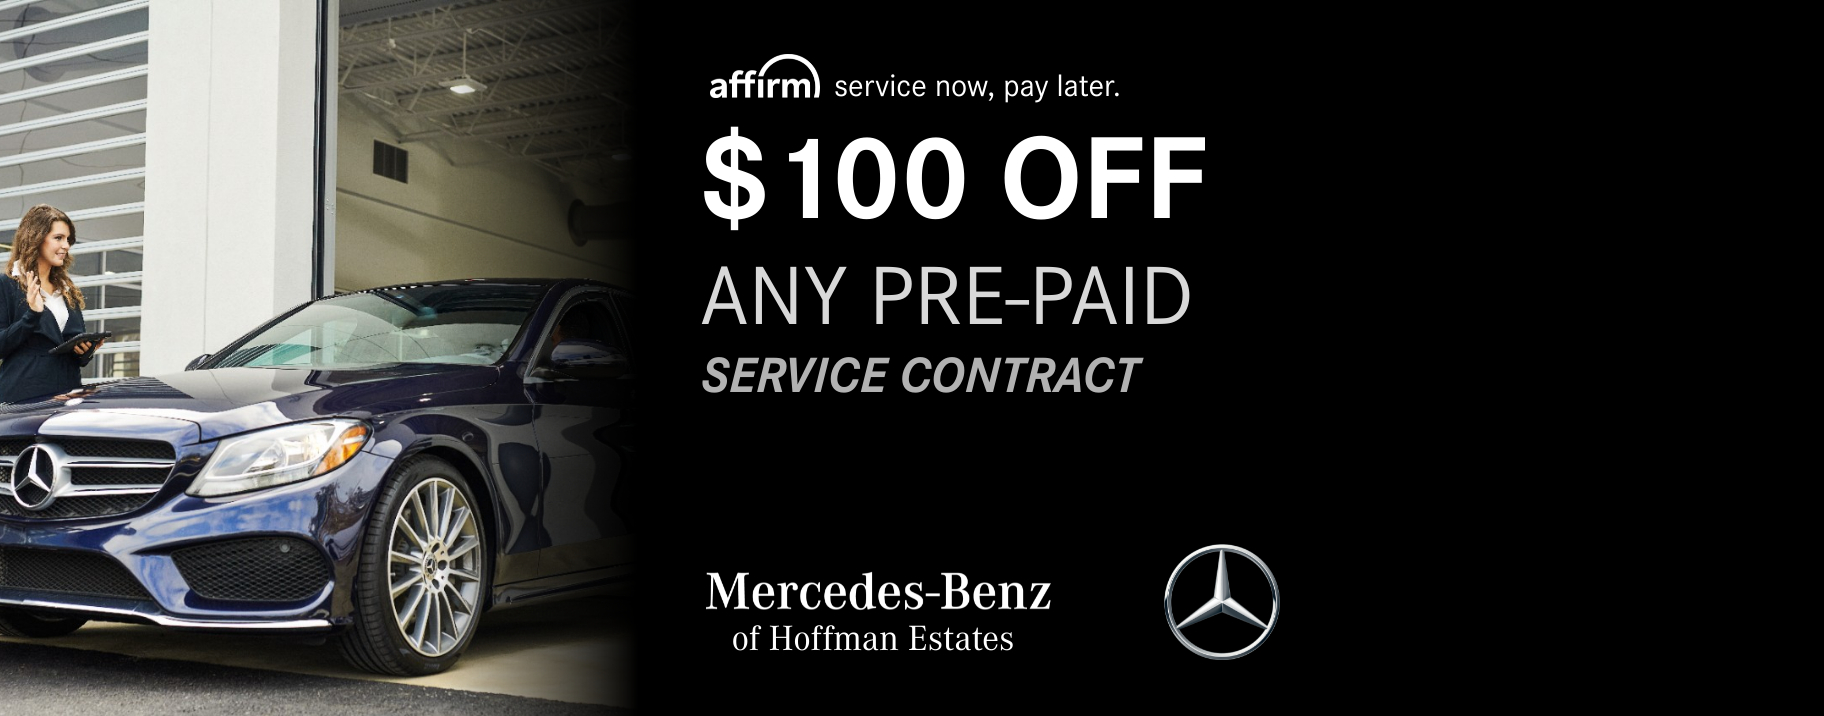 mercedes approved service near me